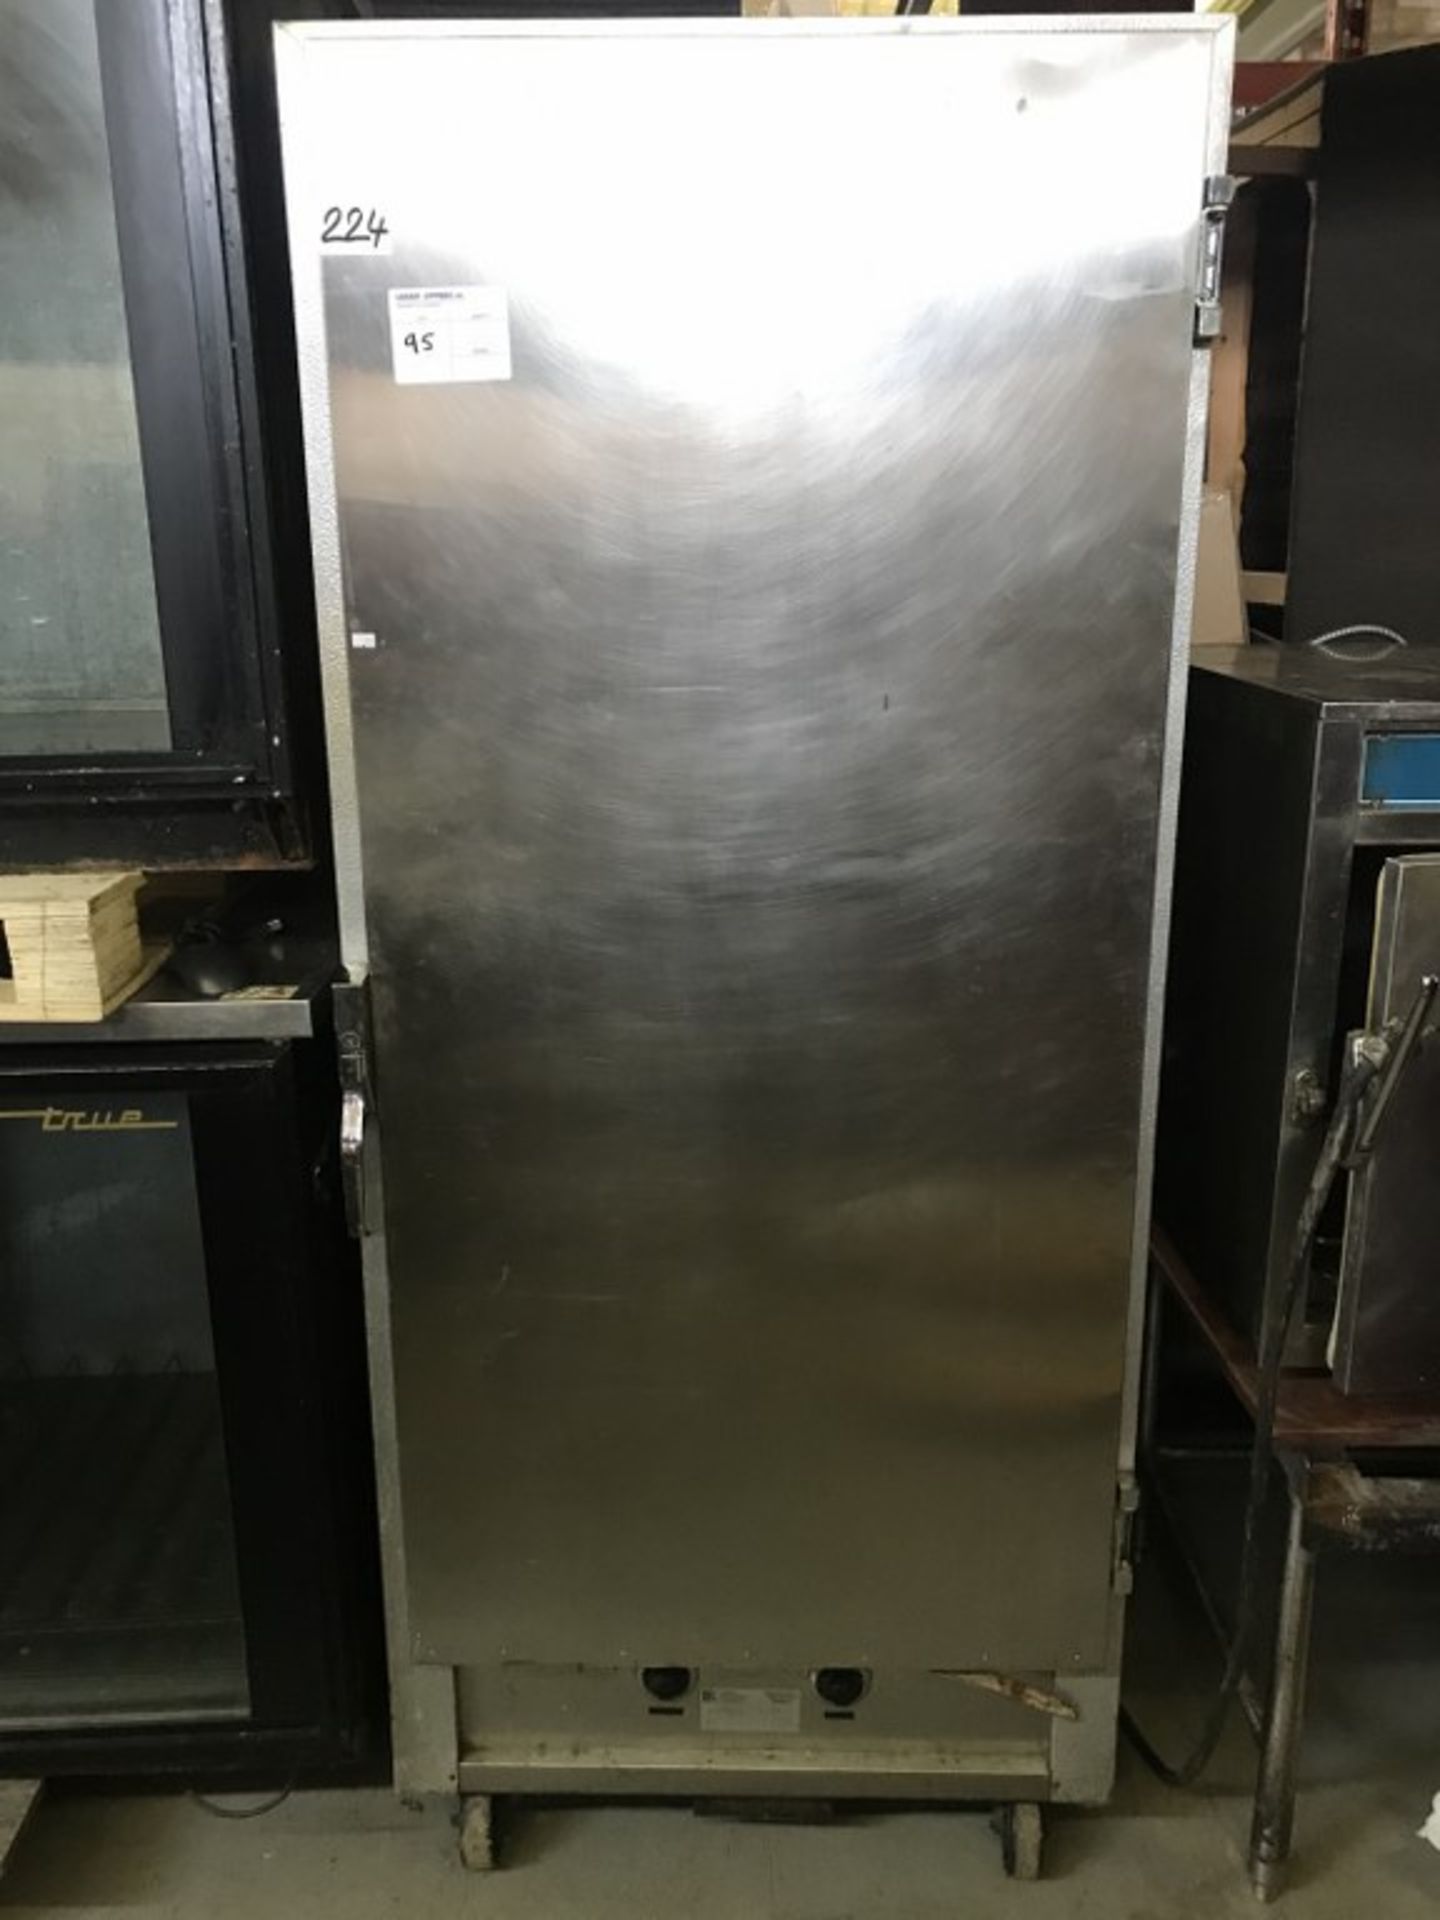 G. CINELLI - HEATED TRAY BAKERS RACK CABINET